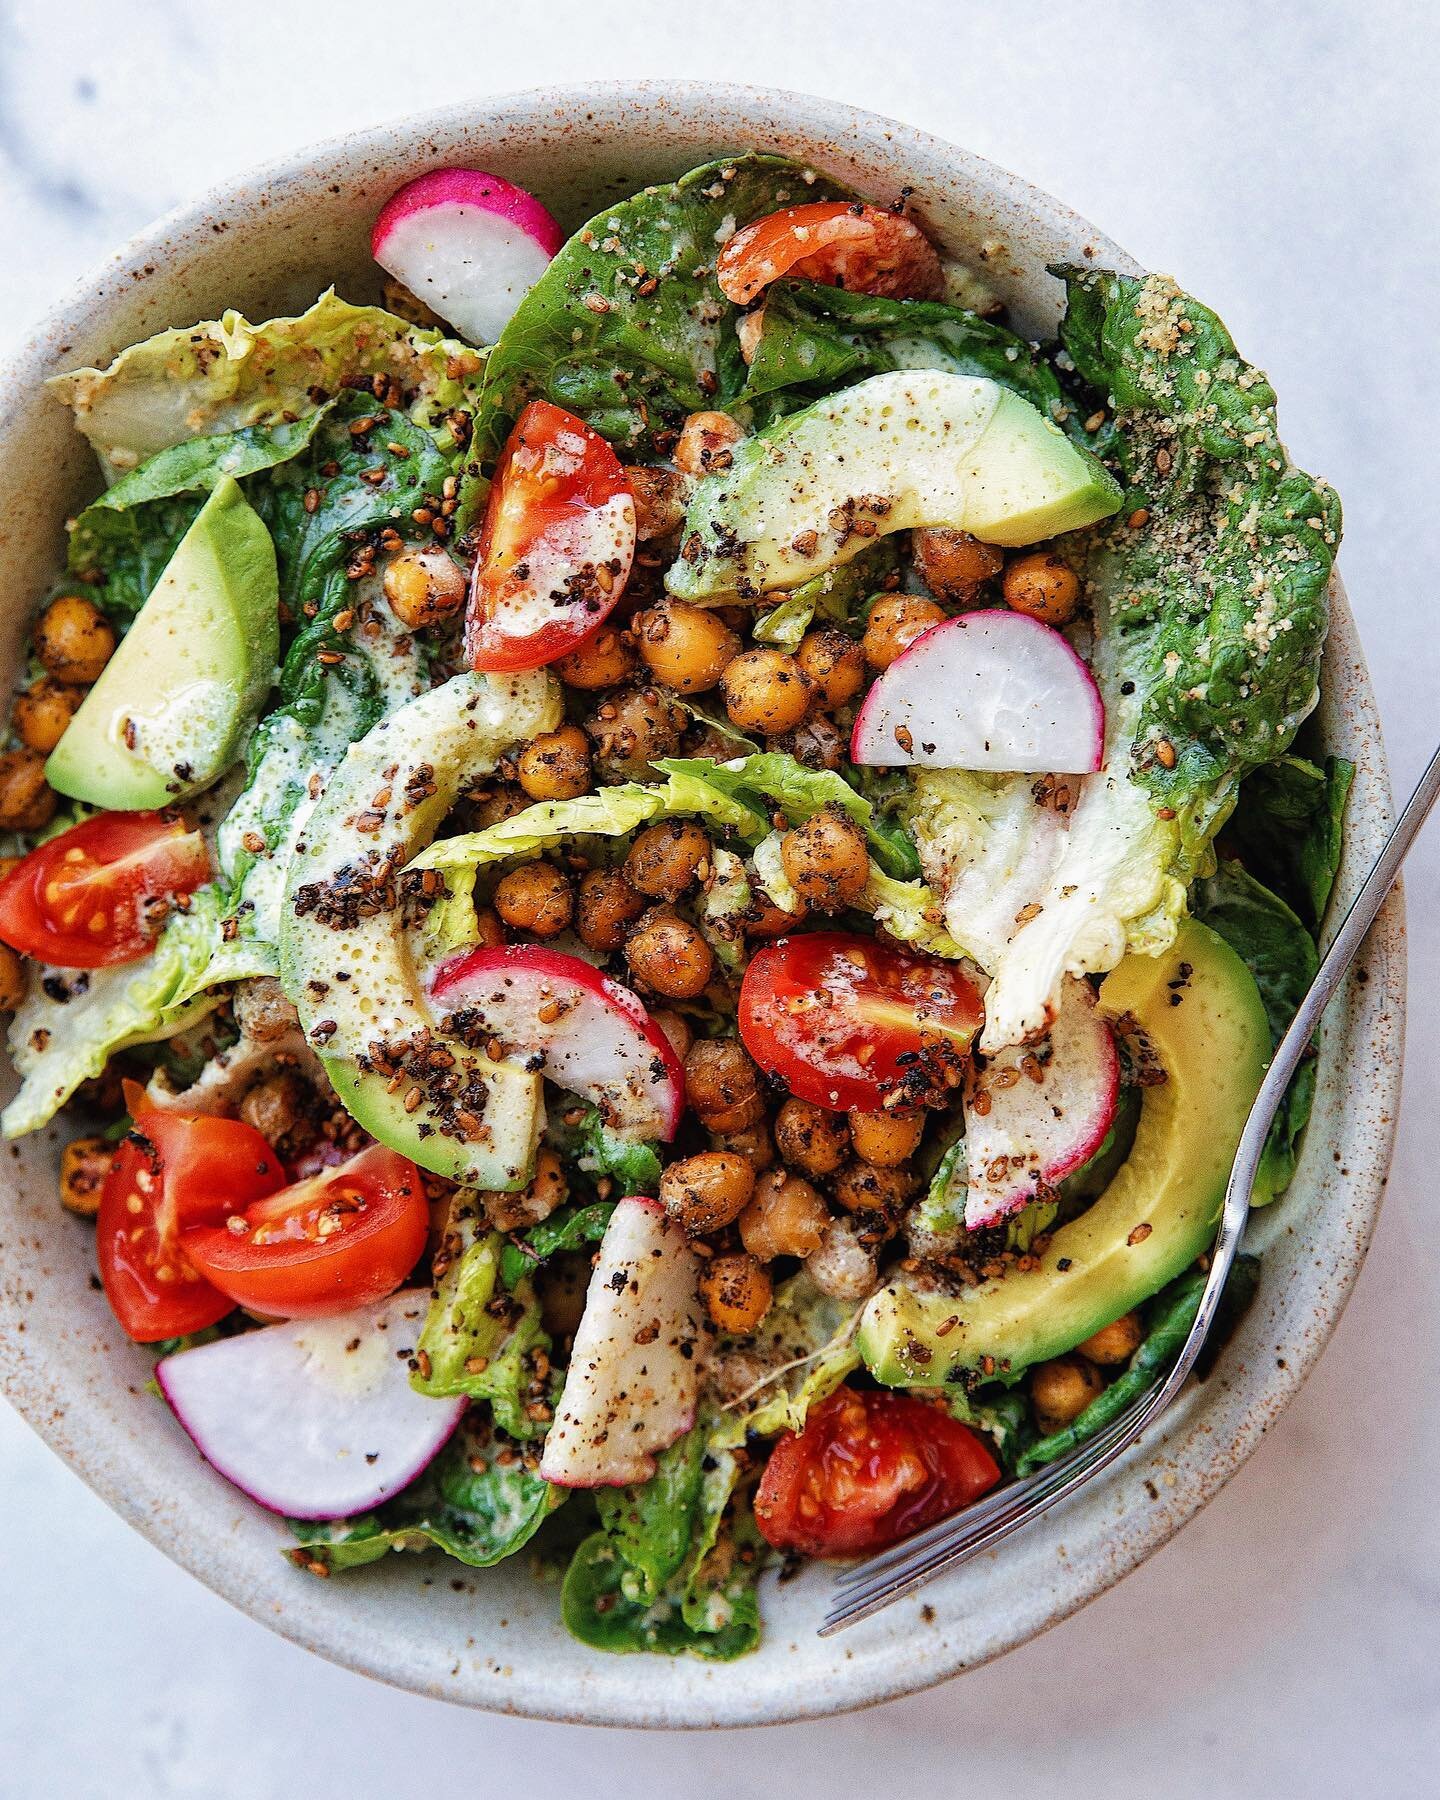 Bringing back this bad boy cause it&rsquo;s been awhile since I&rsquo;ve posted a bangin&rsquo; salad:

Little gem salad with za&rsquo;atar roasted chickpeas! 

Little gem lettuce tossed in a lemony yogurt mustard dressing (recipe below) topped with 